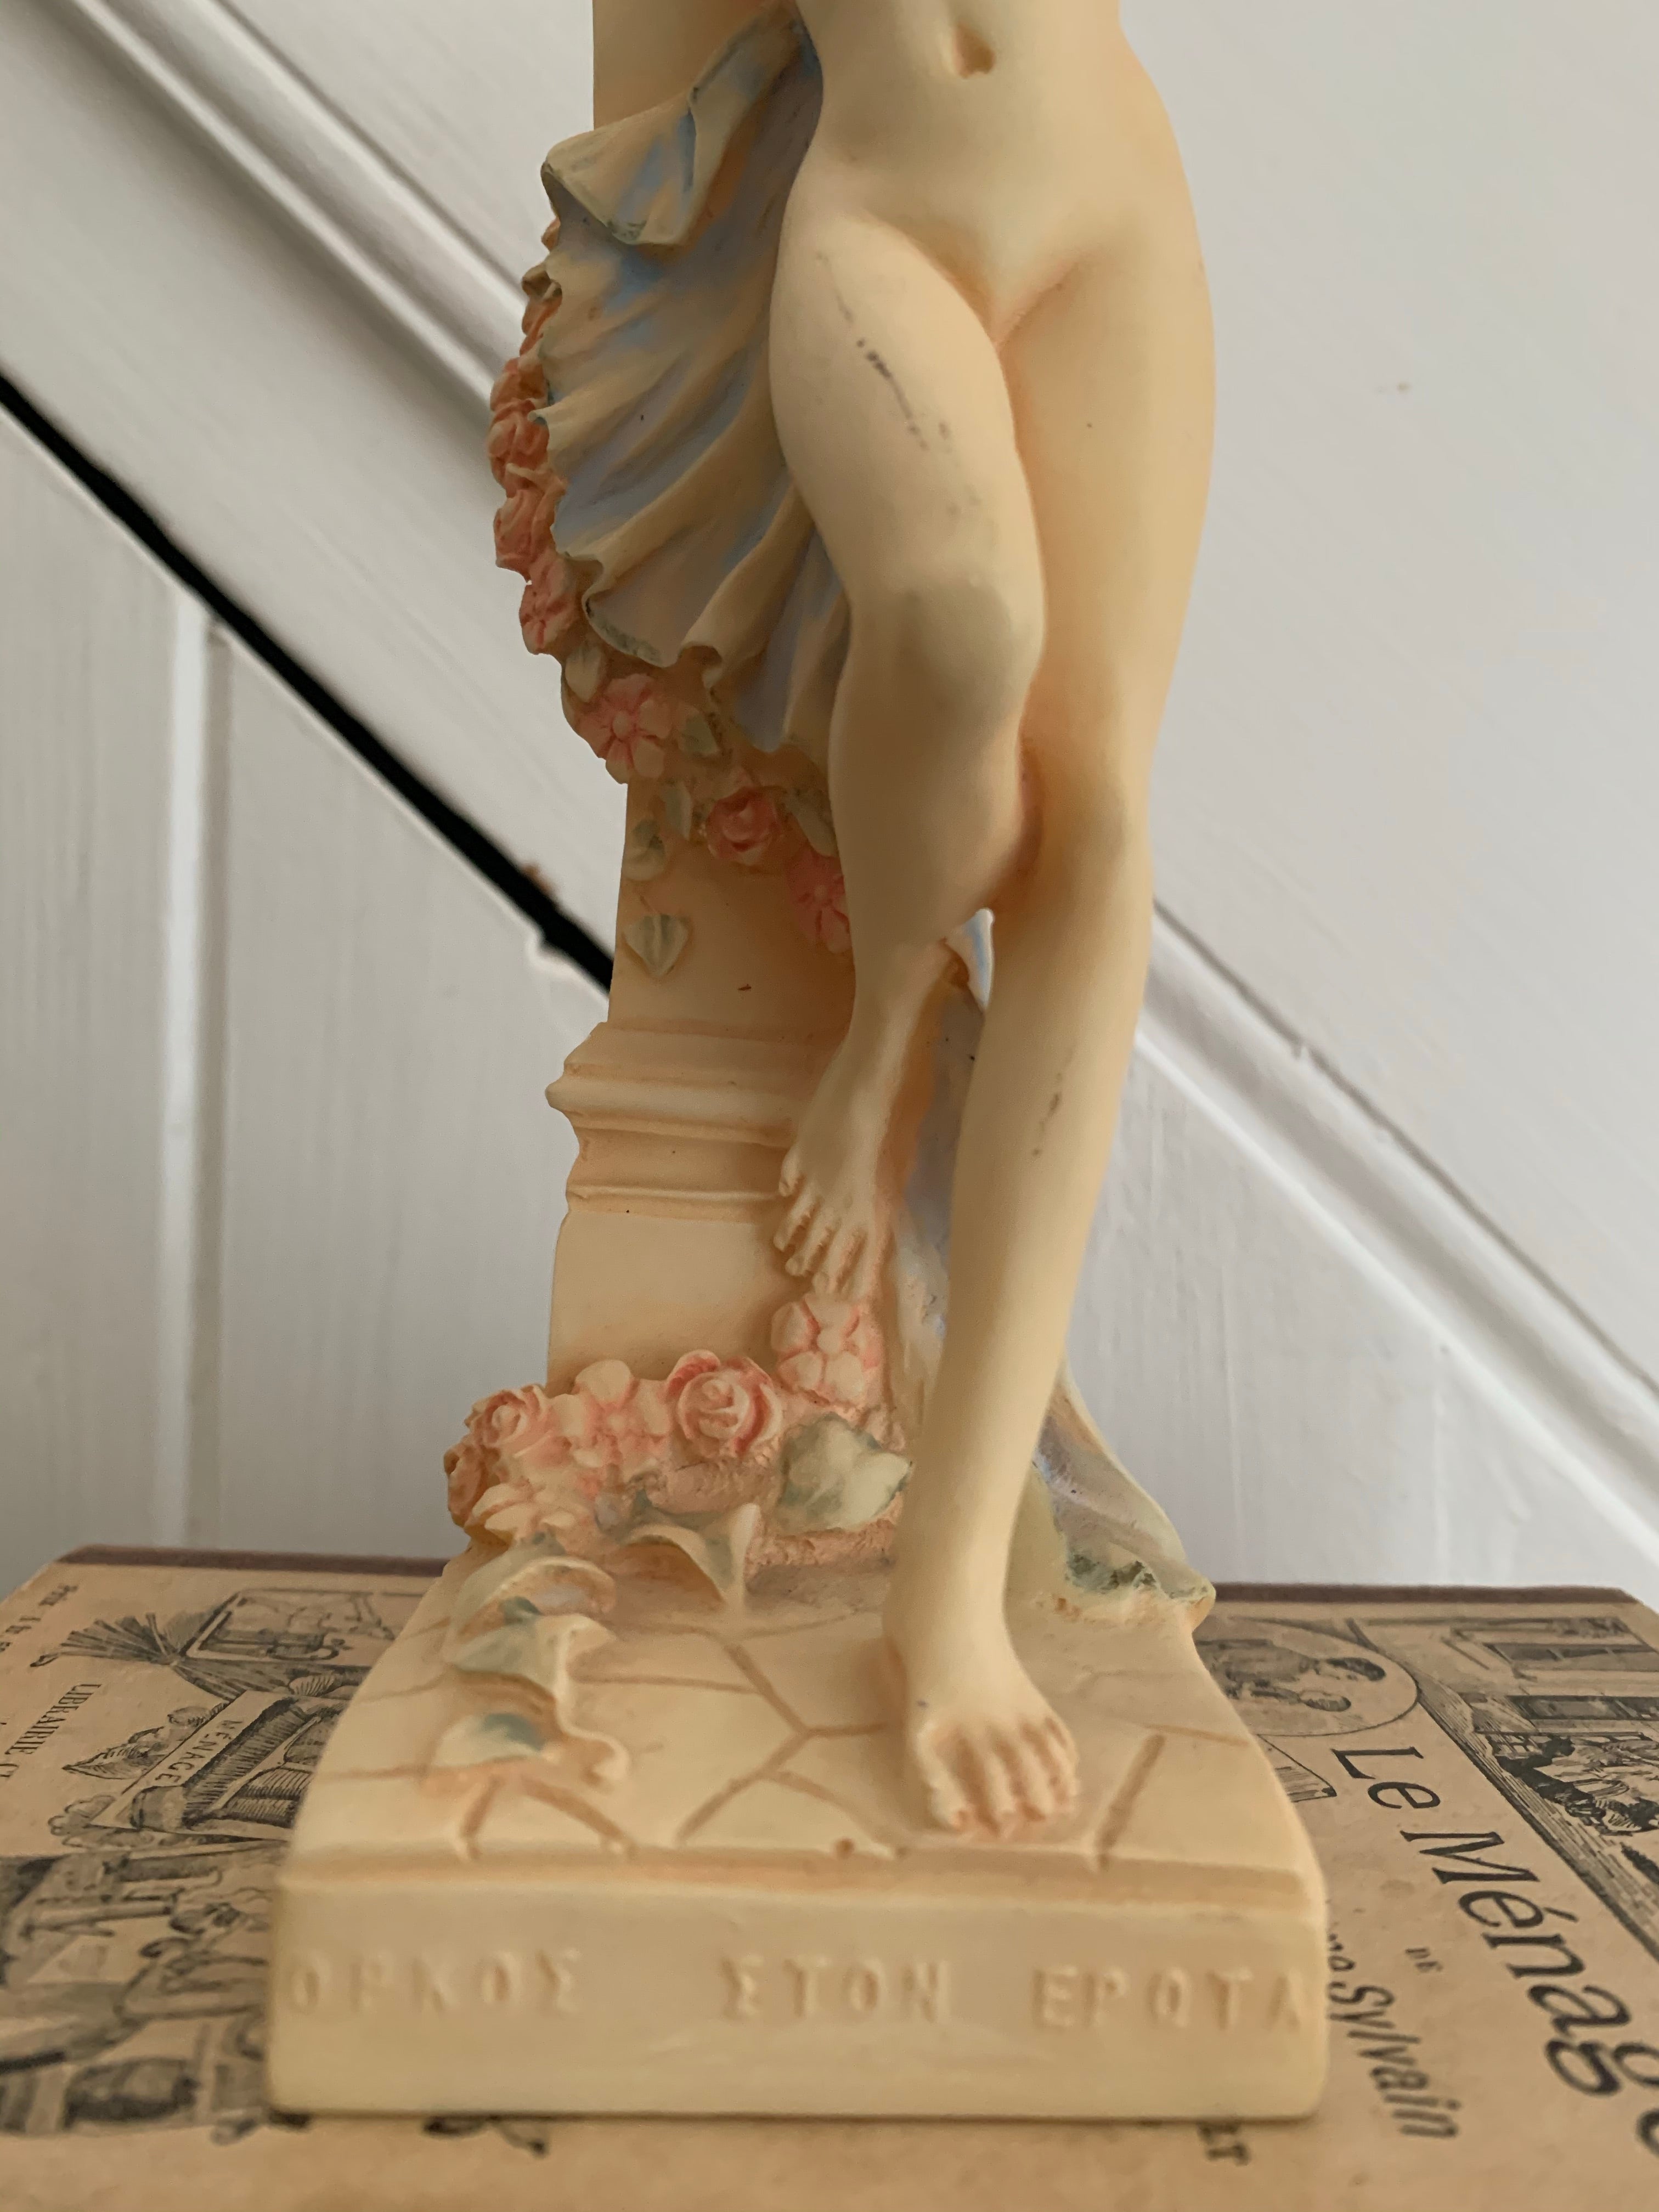 Porcelain and Resin Sculpture in “Classical Style”